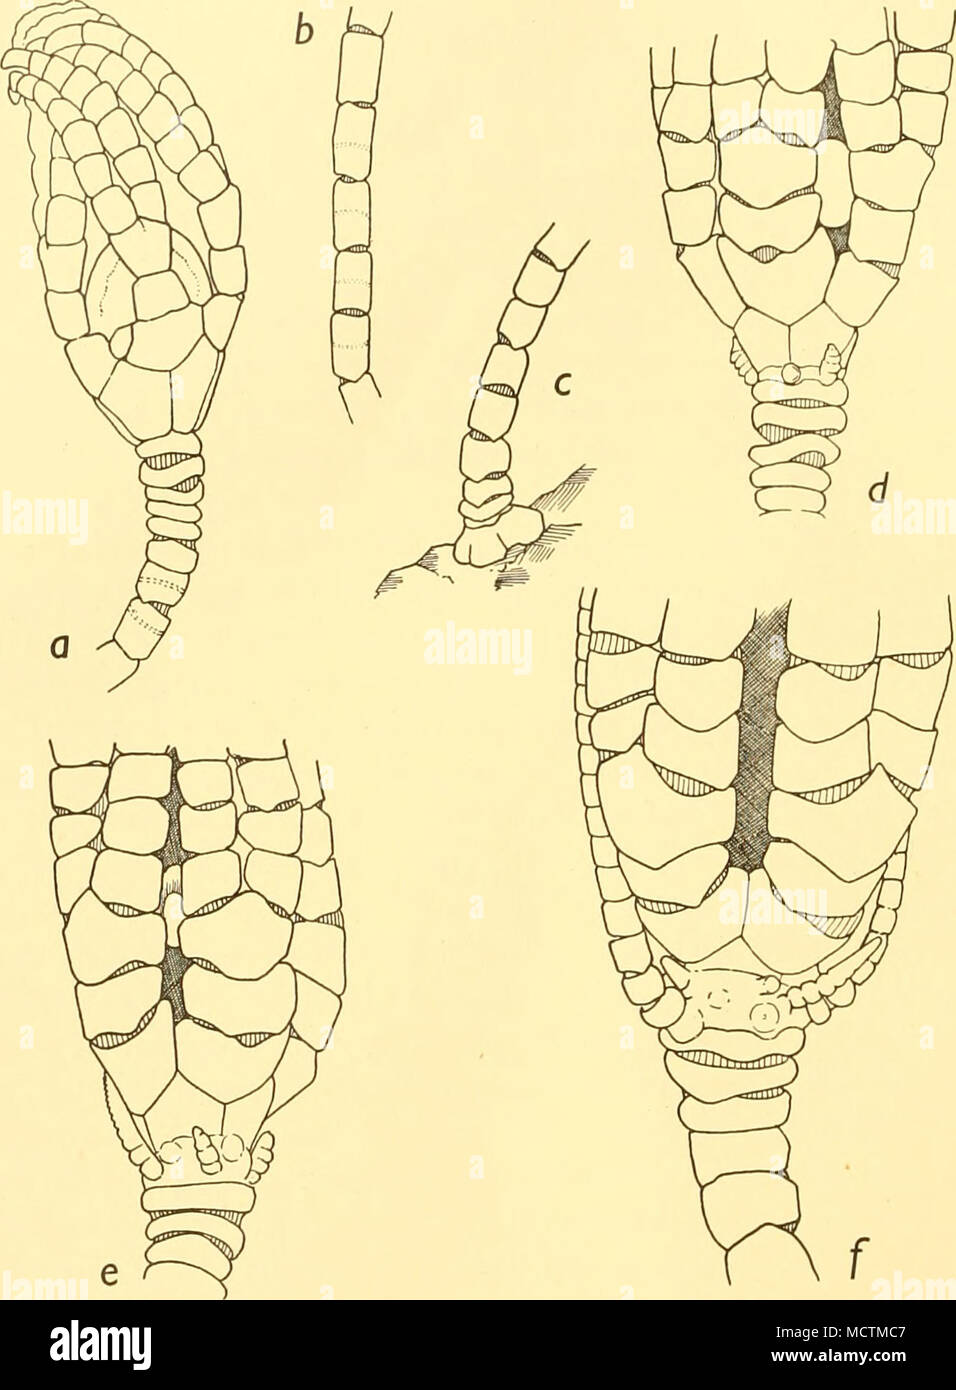 . Fig. 22. Pentacrinoid larvae of Isometra hordea. a, crown and proximal columnals of No. 9. b, tenth to fourteenth columnals of No. 9. c, last columnals and terminal plate of No. 9. d, proximal portions of crown and column of No. 12. e, same of No. 14. /, same of No. 15. All x 18. nals are as short as the first and second; they are irregularly discoidal. The sixth to eighth are longer, the ninth slightly longer than broad. The remainder of the stem is similar to that of No. 11; none of the columnals has a median girdle. The radials are longer than the basals. They are all in broad and complet Stock Photo